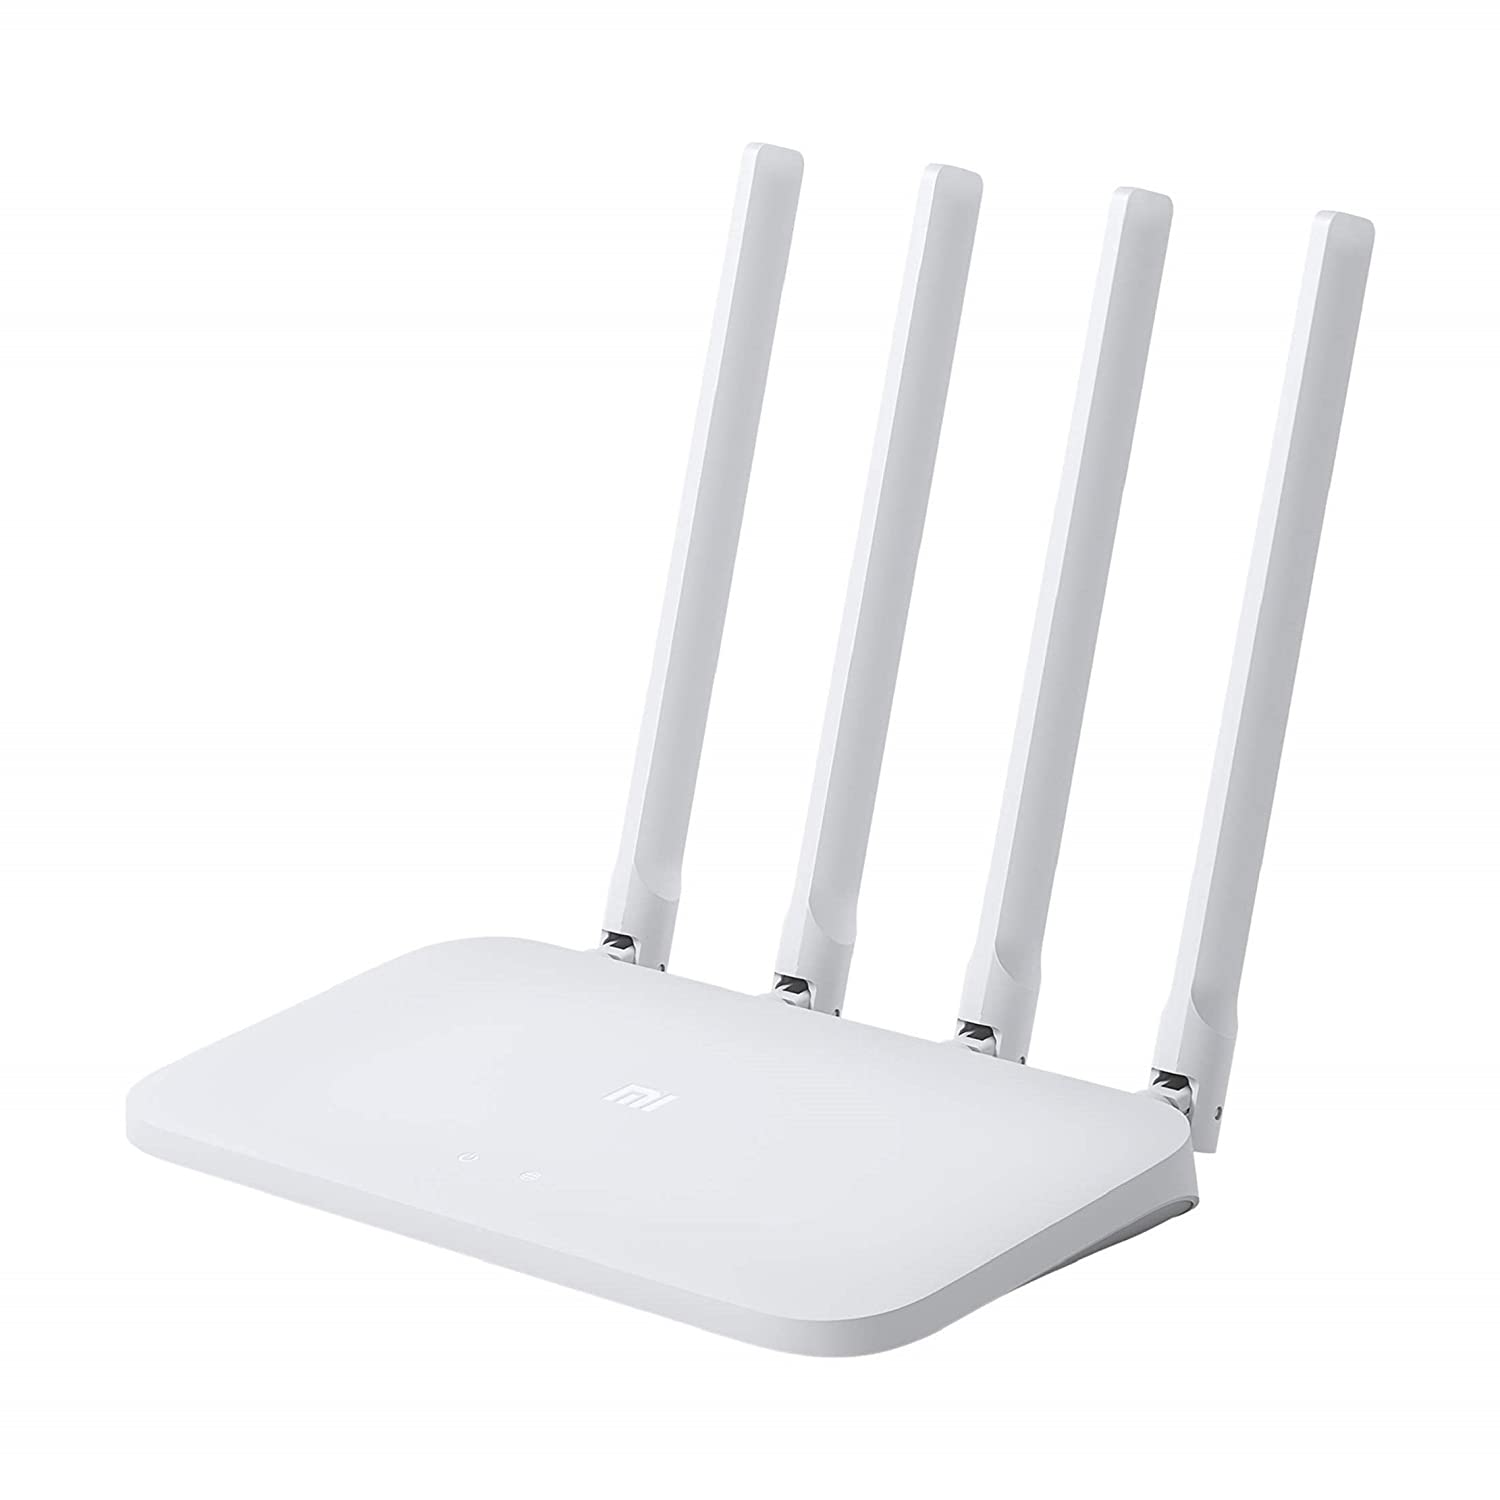 Mi Smart Router 4C, 300 Mbps with 4 high-Performance Antenna &amp; App Control